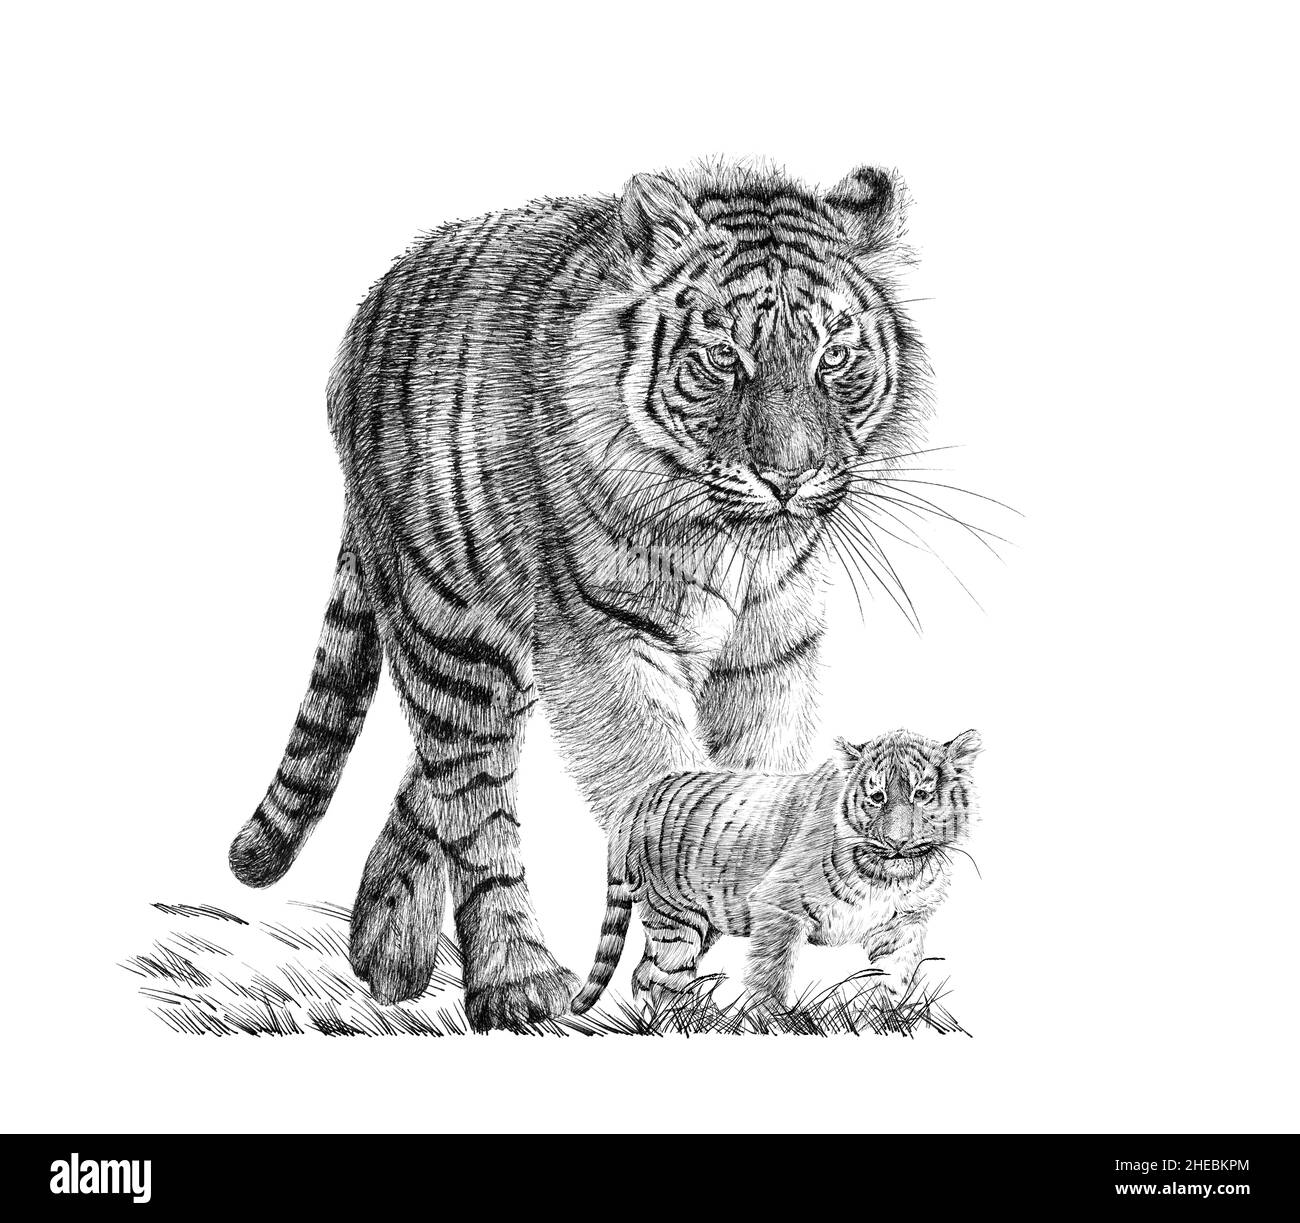 Online classes How to draw a baby tiger on hand step by step  YouTube